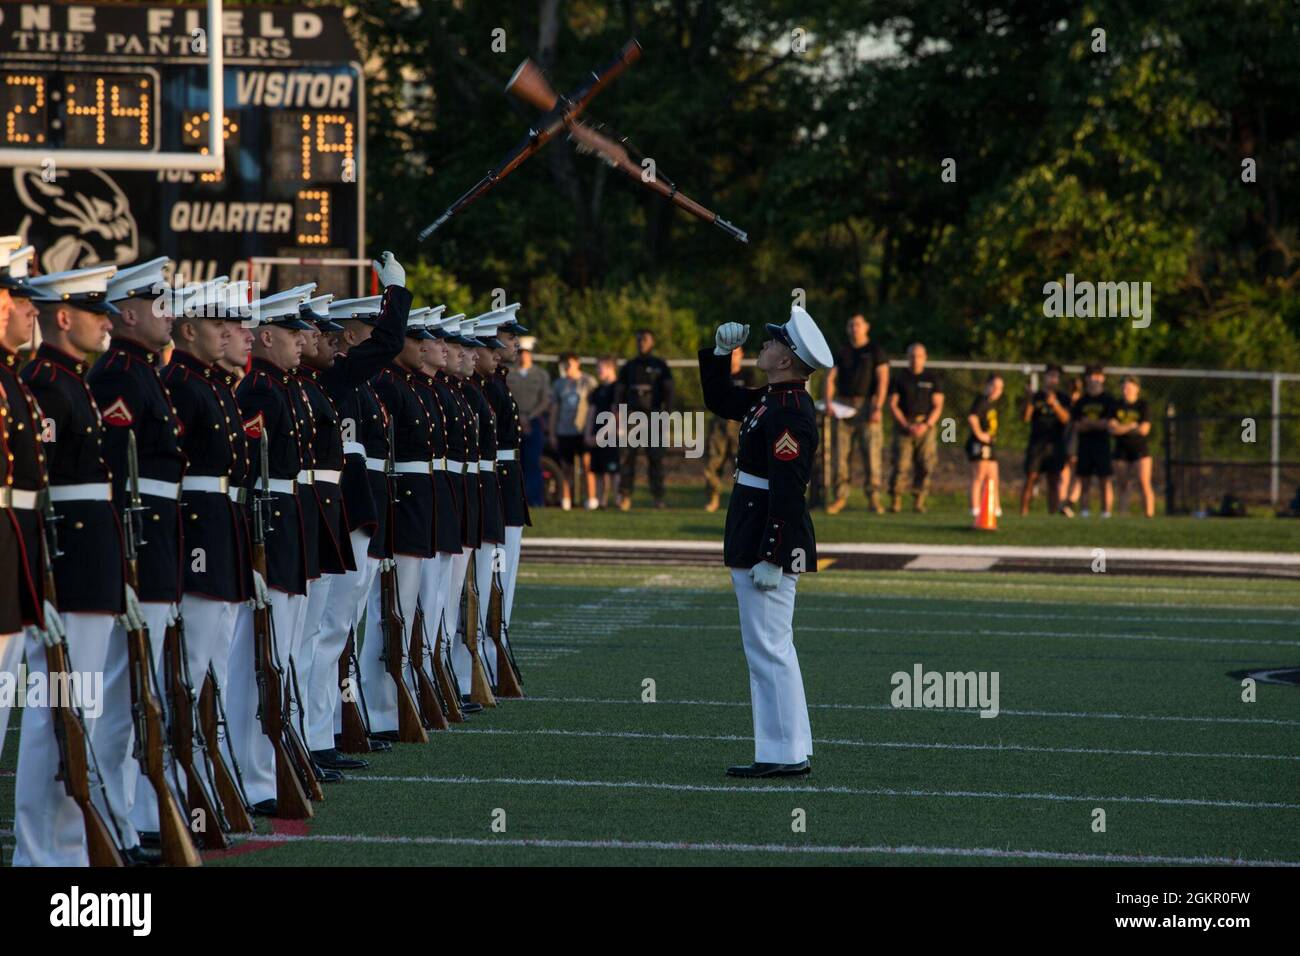 Corporal Xavier Cockrell, number one rifle inspector, Silent Drill Platoon, conducts a rifle inspection during the Basilone Bowl halftime show at Bridgewater-Raritan High School, Raritan, N.J., June 16, 2021. The Basilone Bowl is an All-Star Football game which features the Devil Dogs versus the Leathernecks and is played in honor of GySgt. John Basilone, a Medal of Honor and Navy Cross recipient. Stock Photo